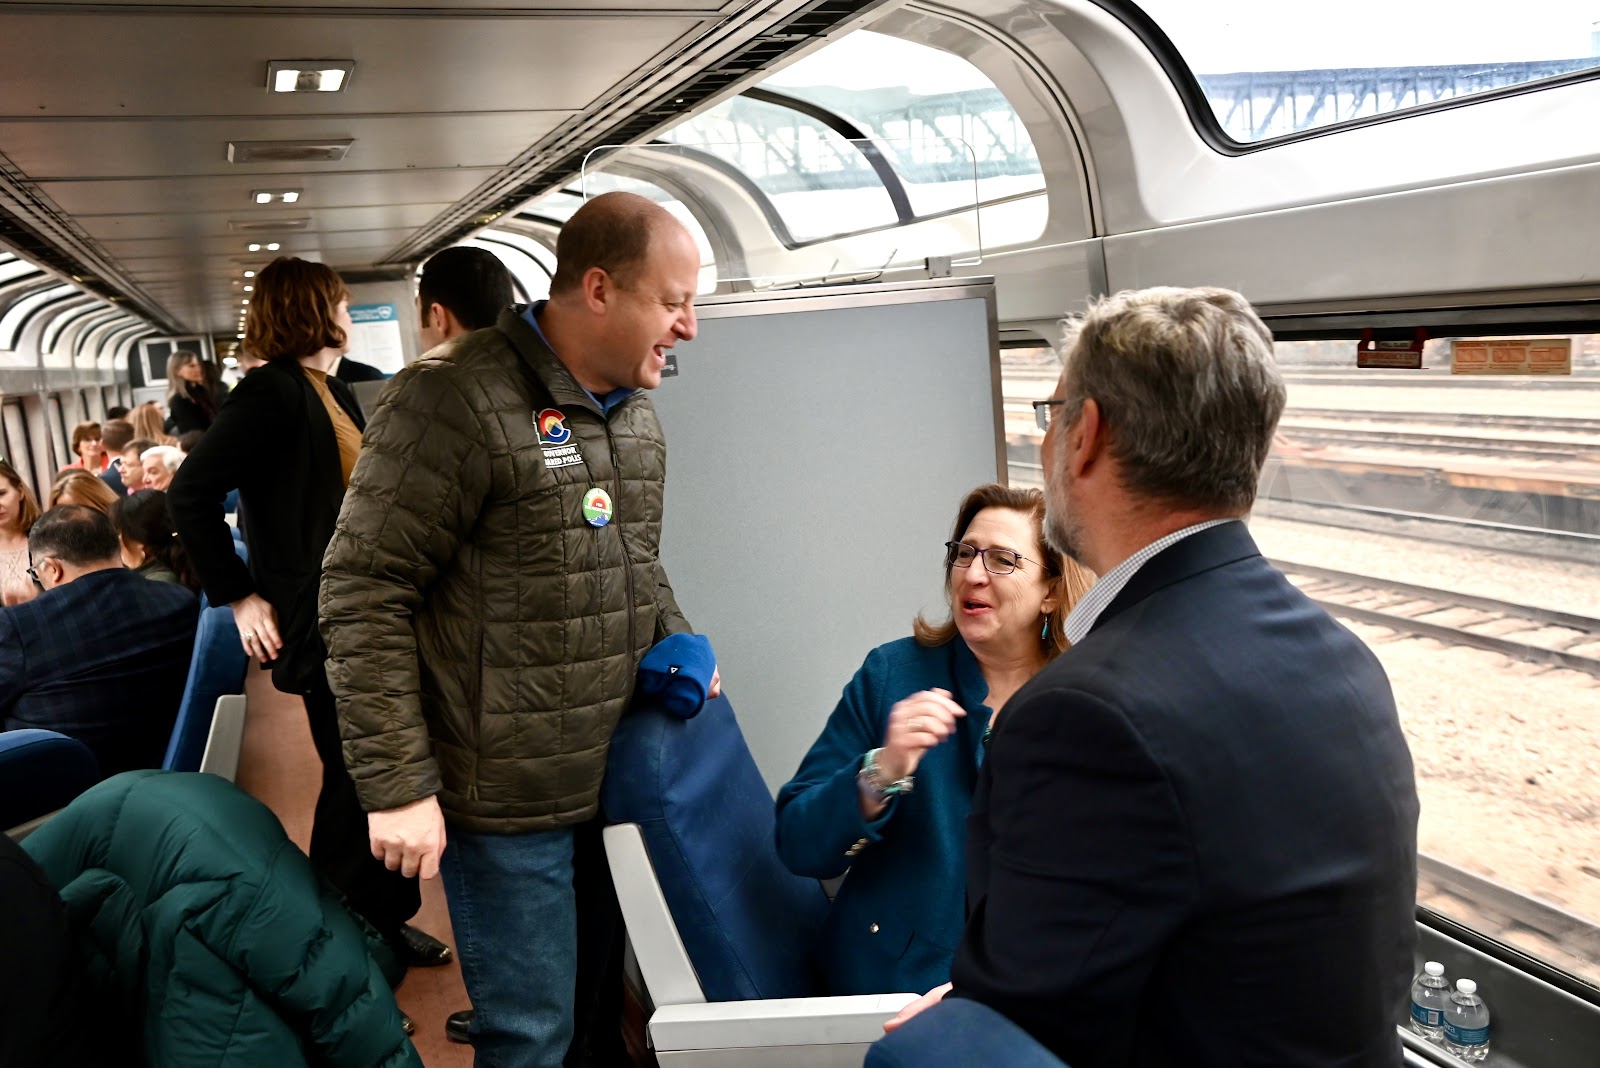 Governor Polis speaks with passengers on the train during the ride.